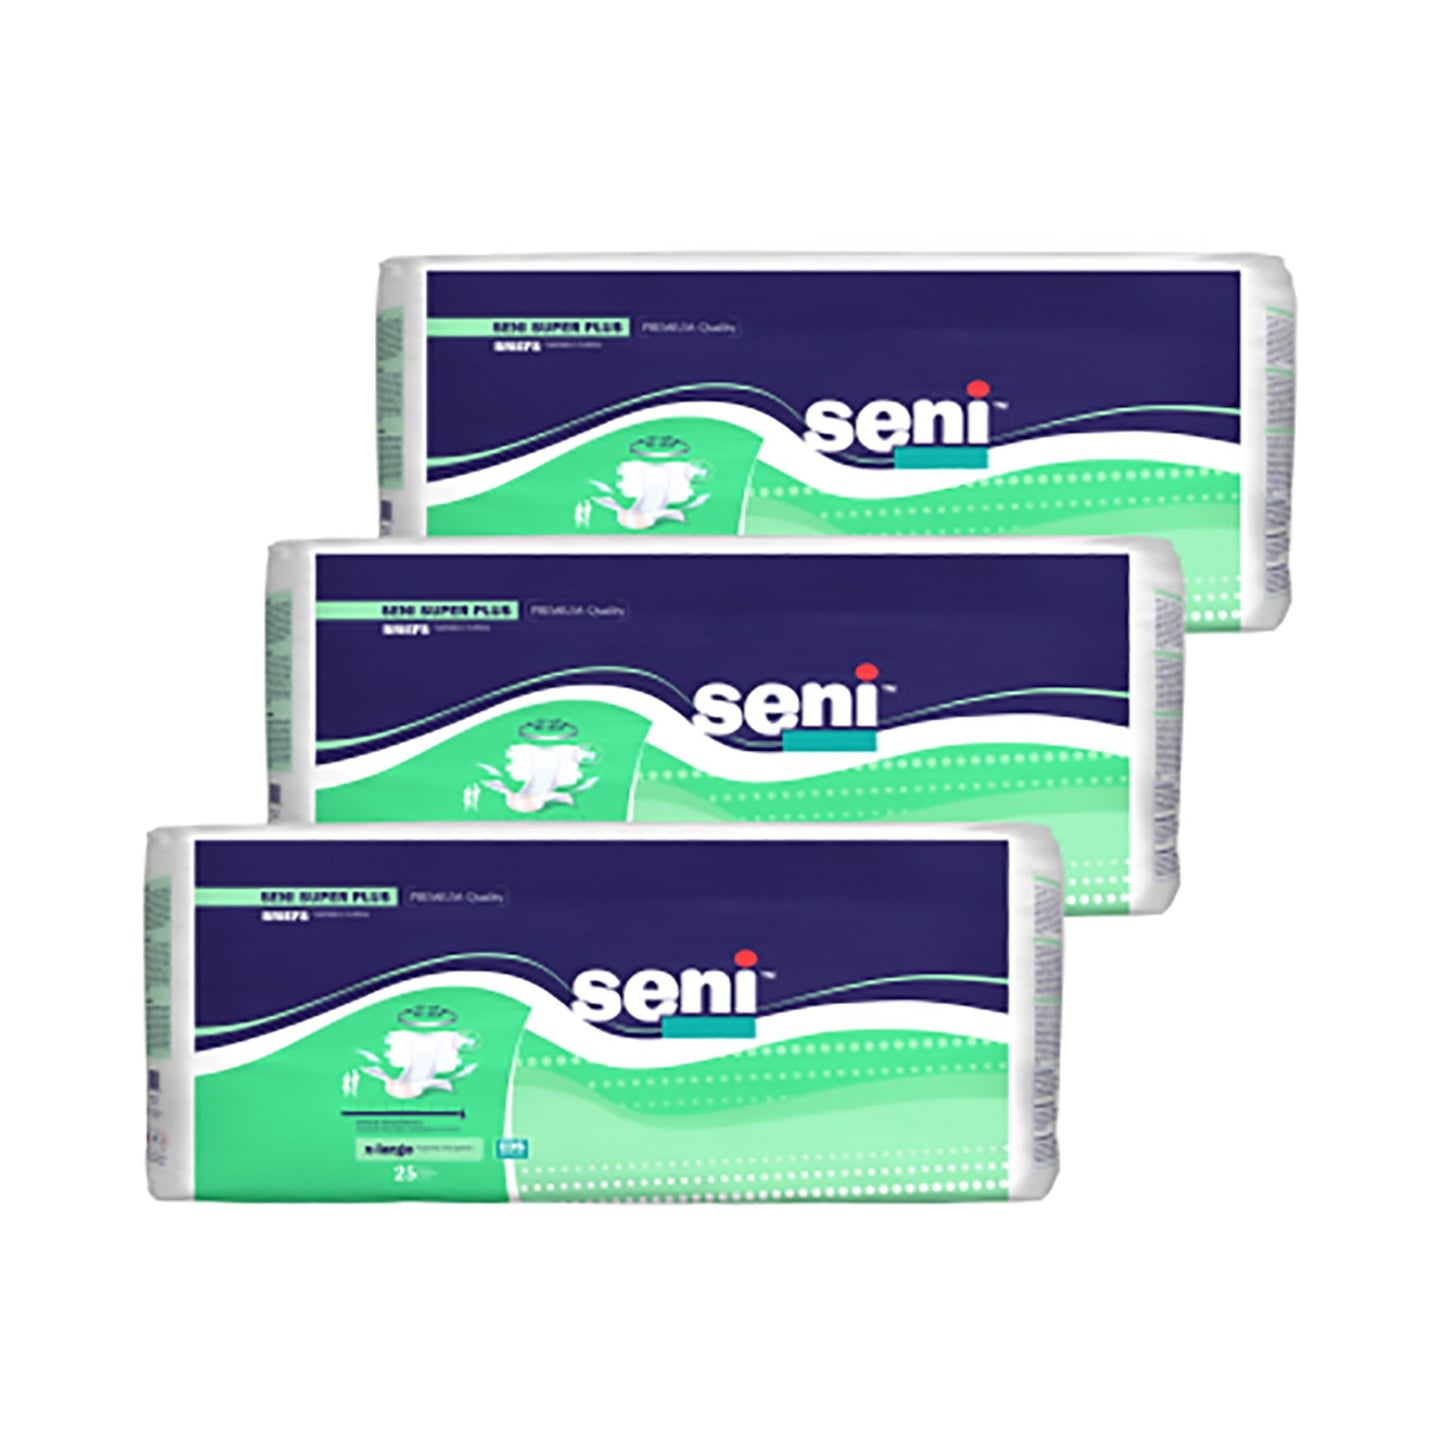 Seni® Super Plus Severe Absorbency Incontinence Brief, Extra Large